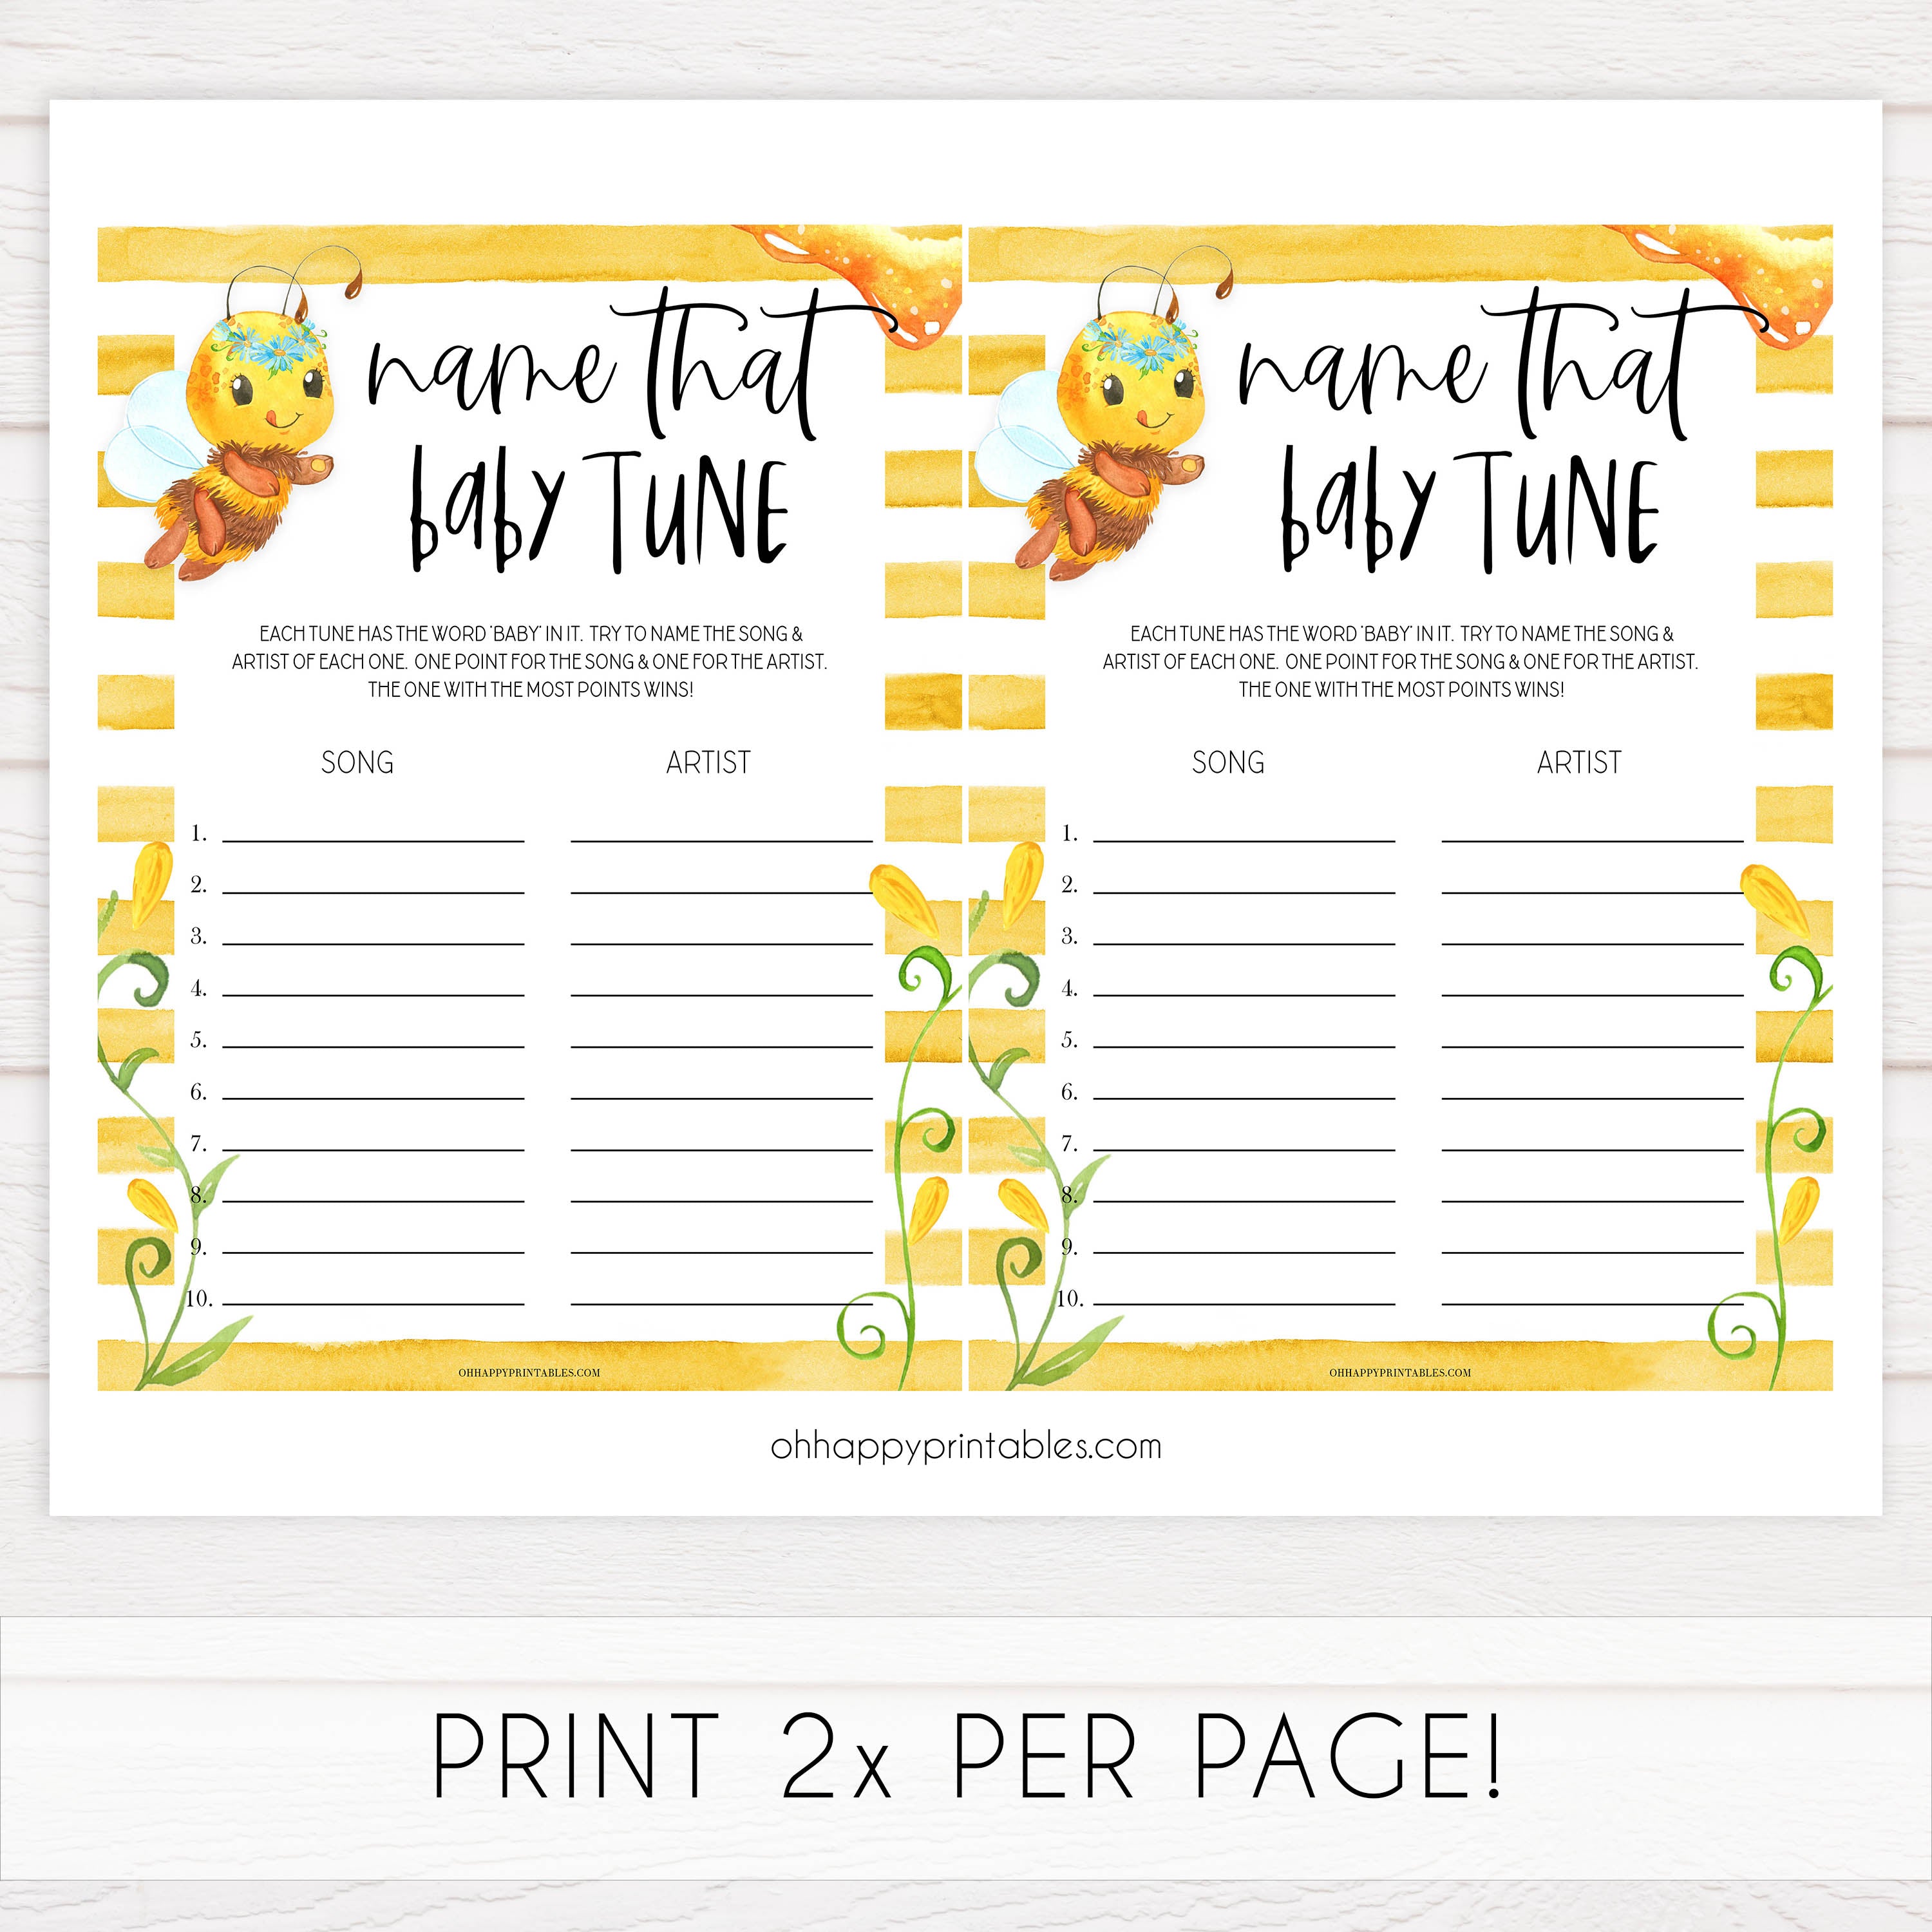 name that baby tune game, Printable baby shower games, mommy bee fun baby games, baby shower games, fun baby shower ideas, top baby shower ideas, mommy to bee baby shower, friends baby shower ideas